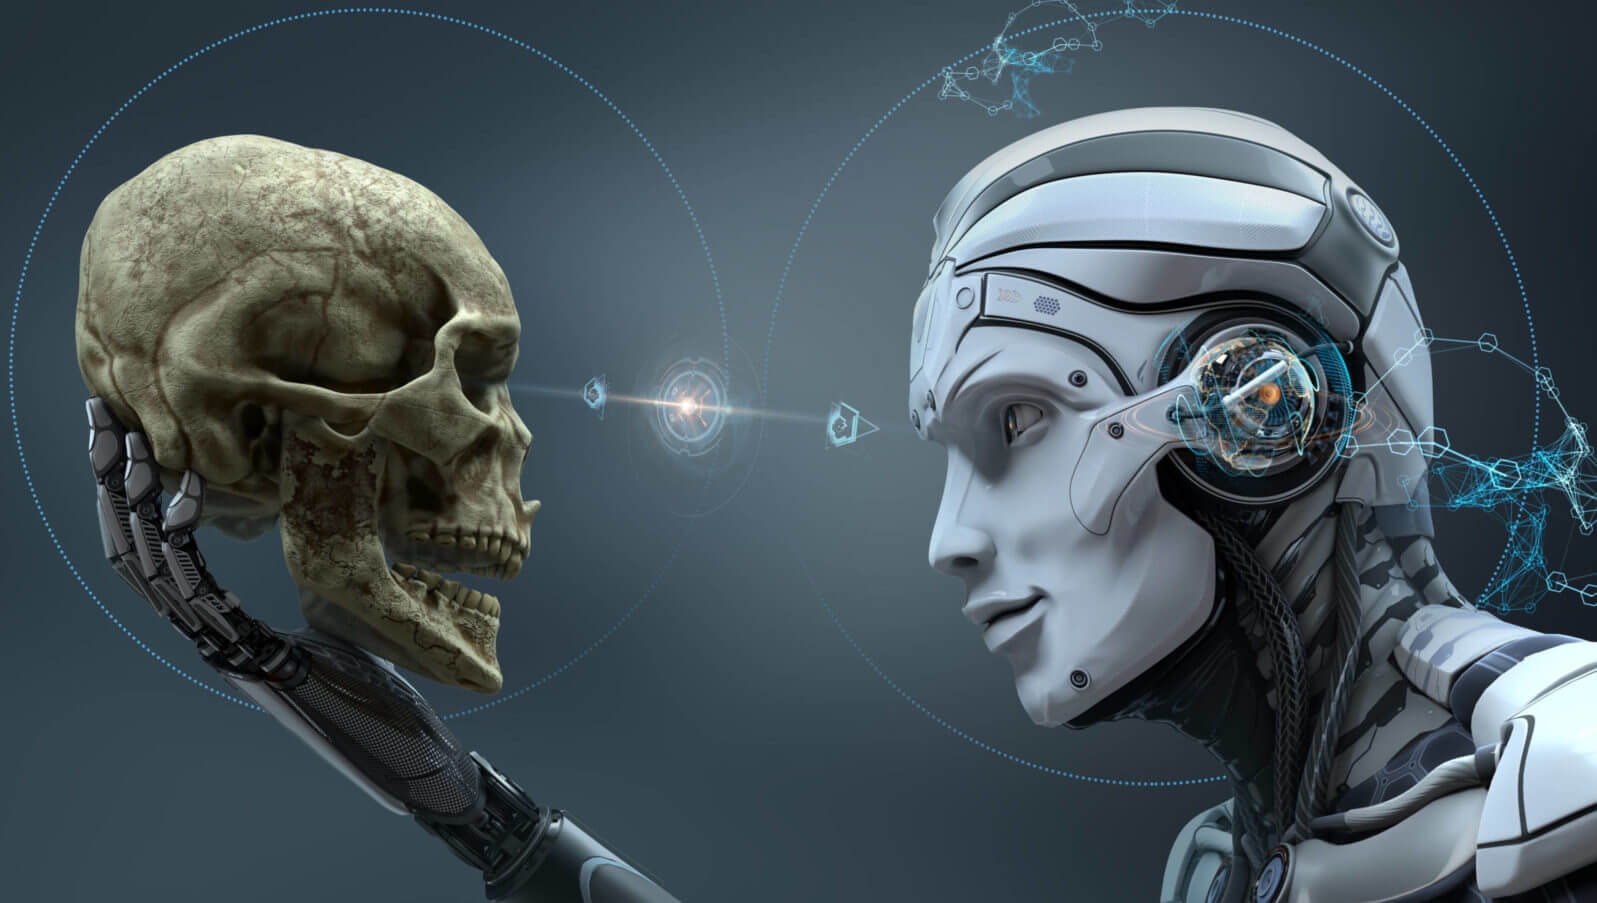 Will Artificial Intelligence Ever Become Conscious?